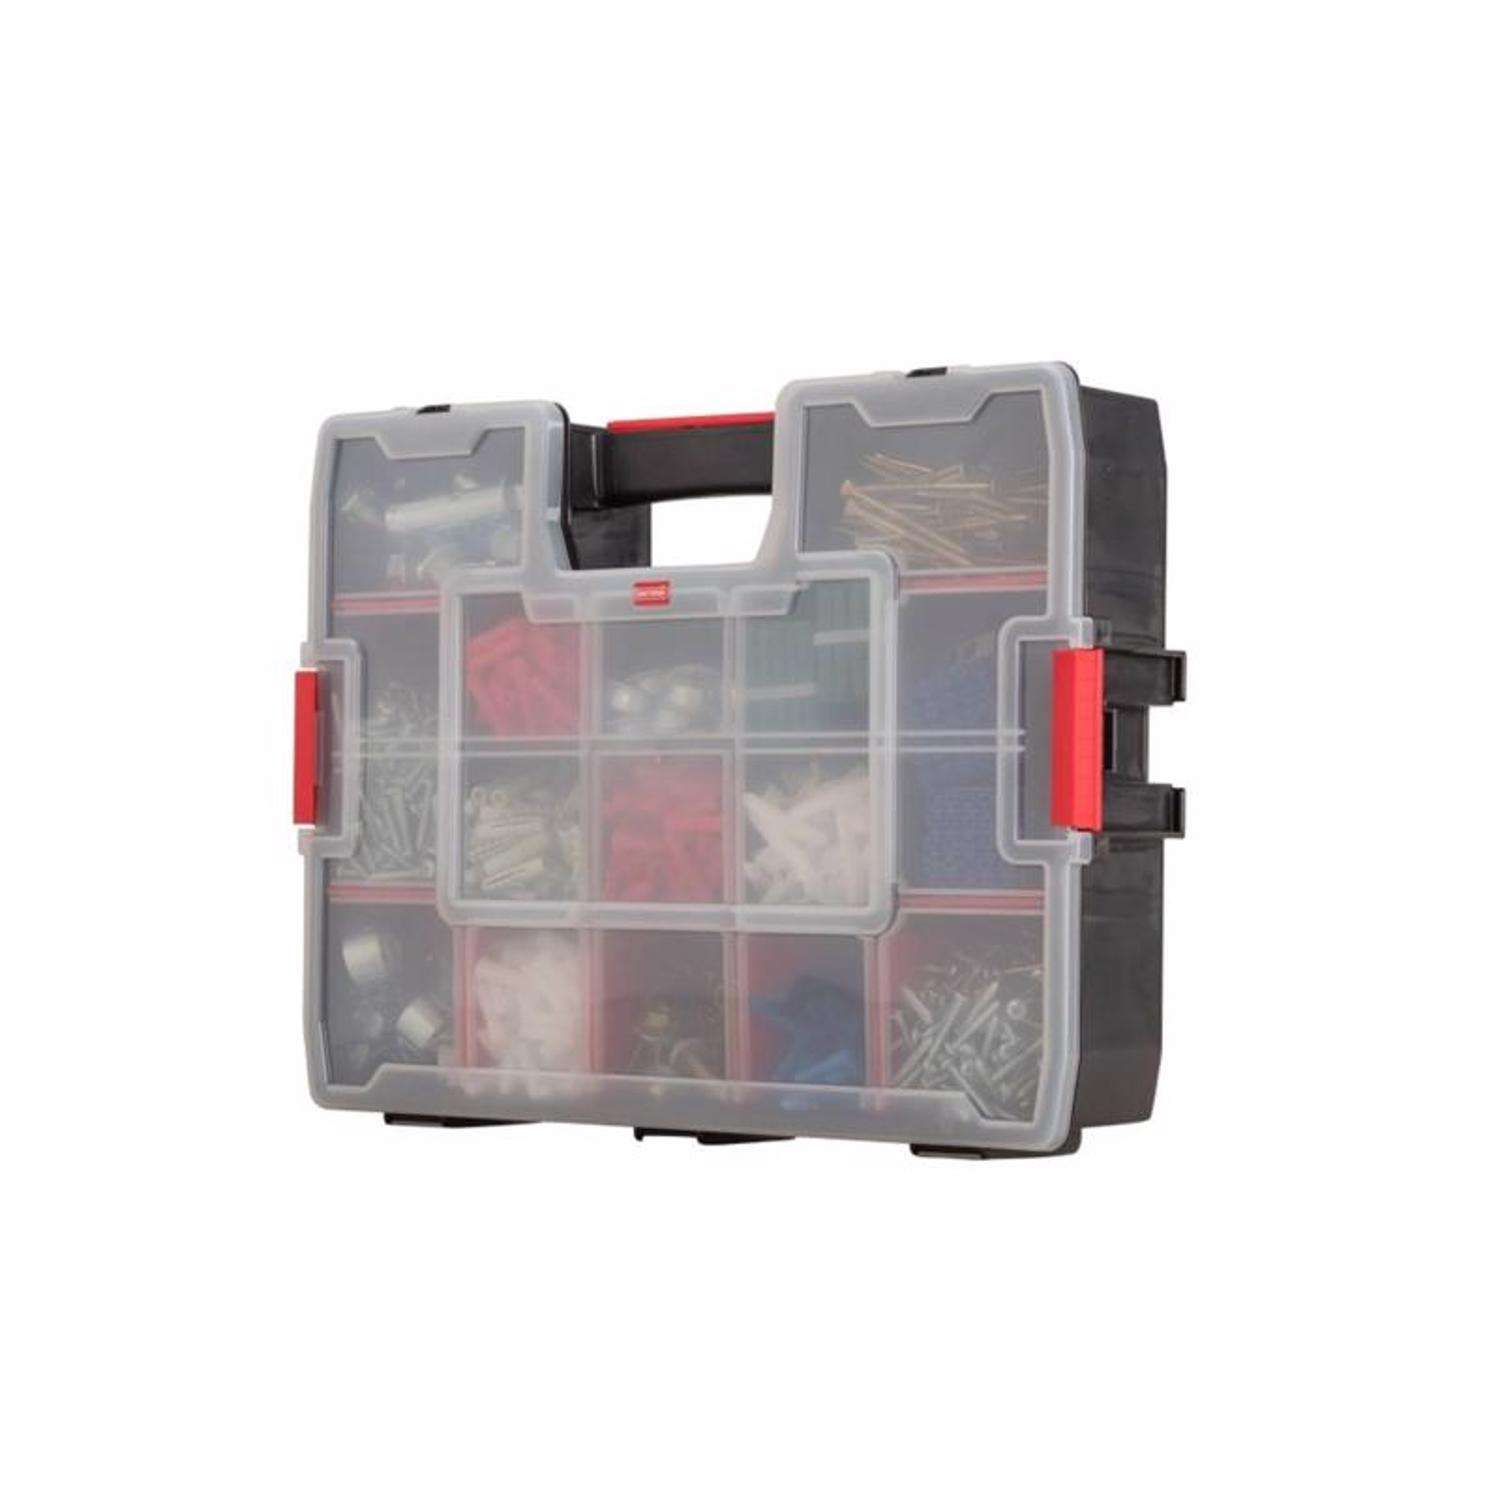 CRAFTSMAN 3-Pack 10-Compartment Plastic Small Parts Organizer in